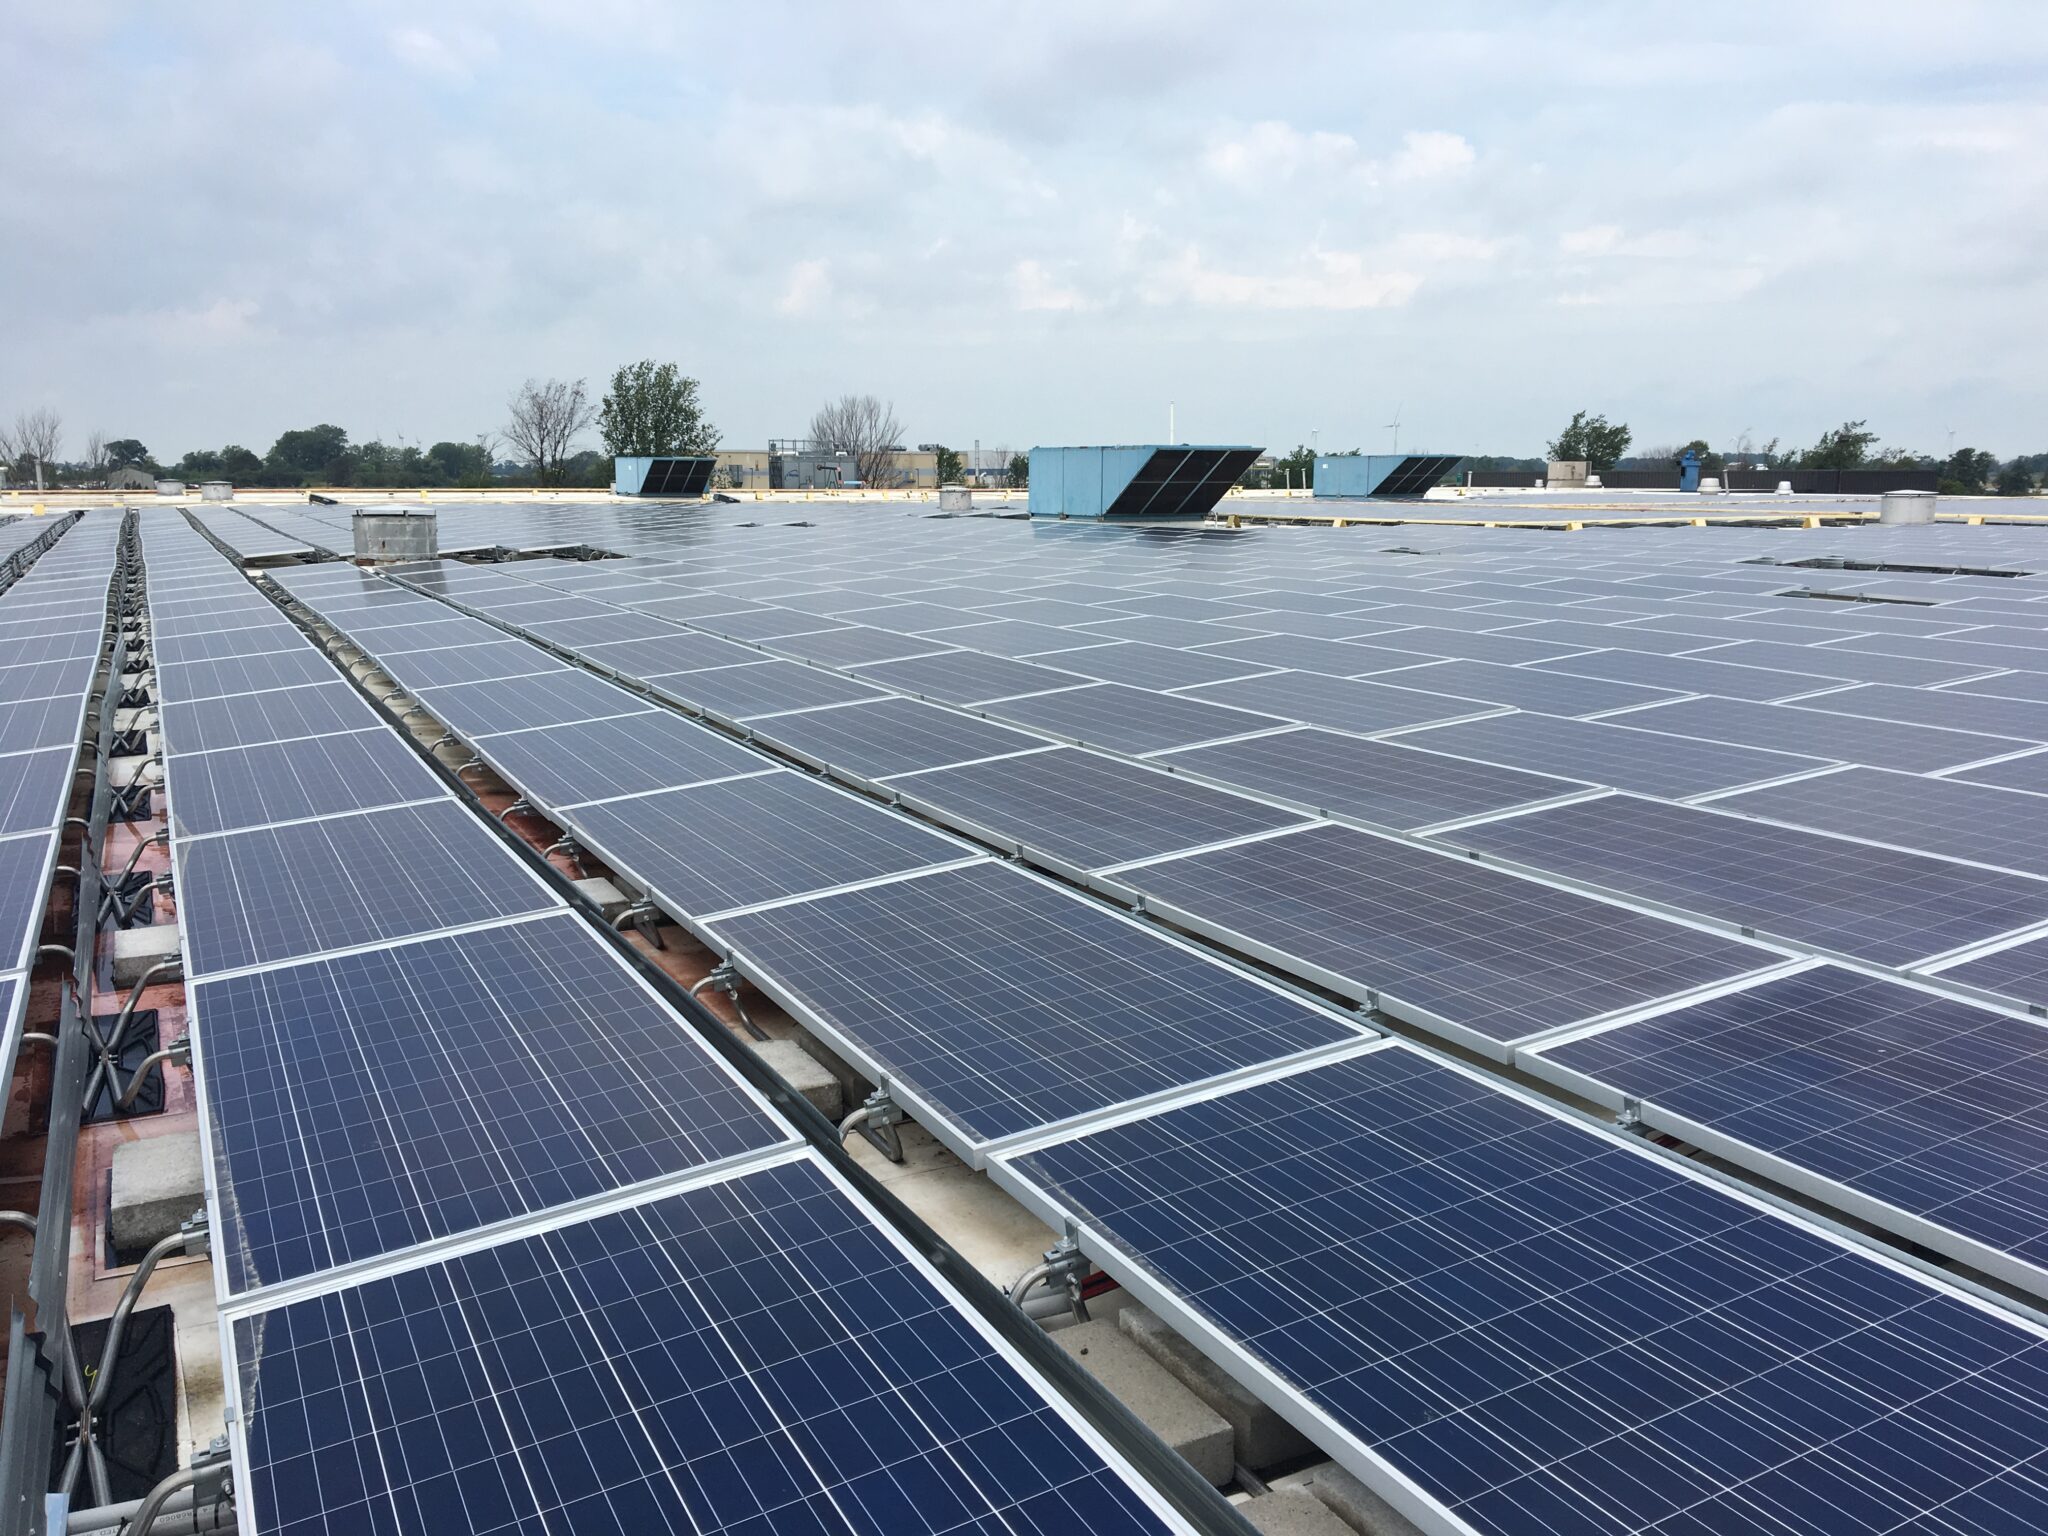 Acquires 7 Rooftop Solar Assets